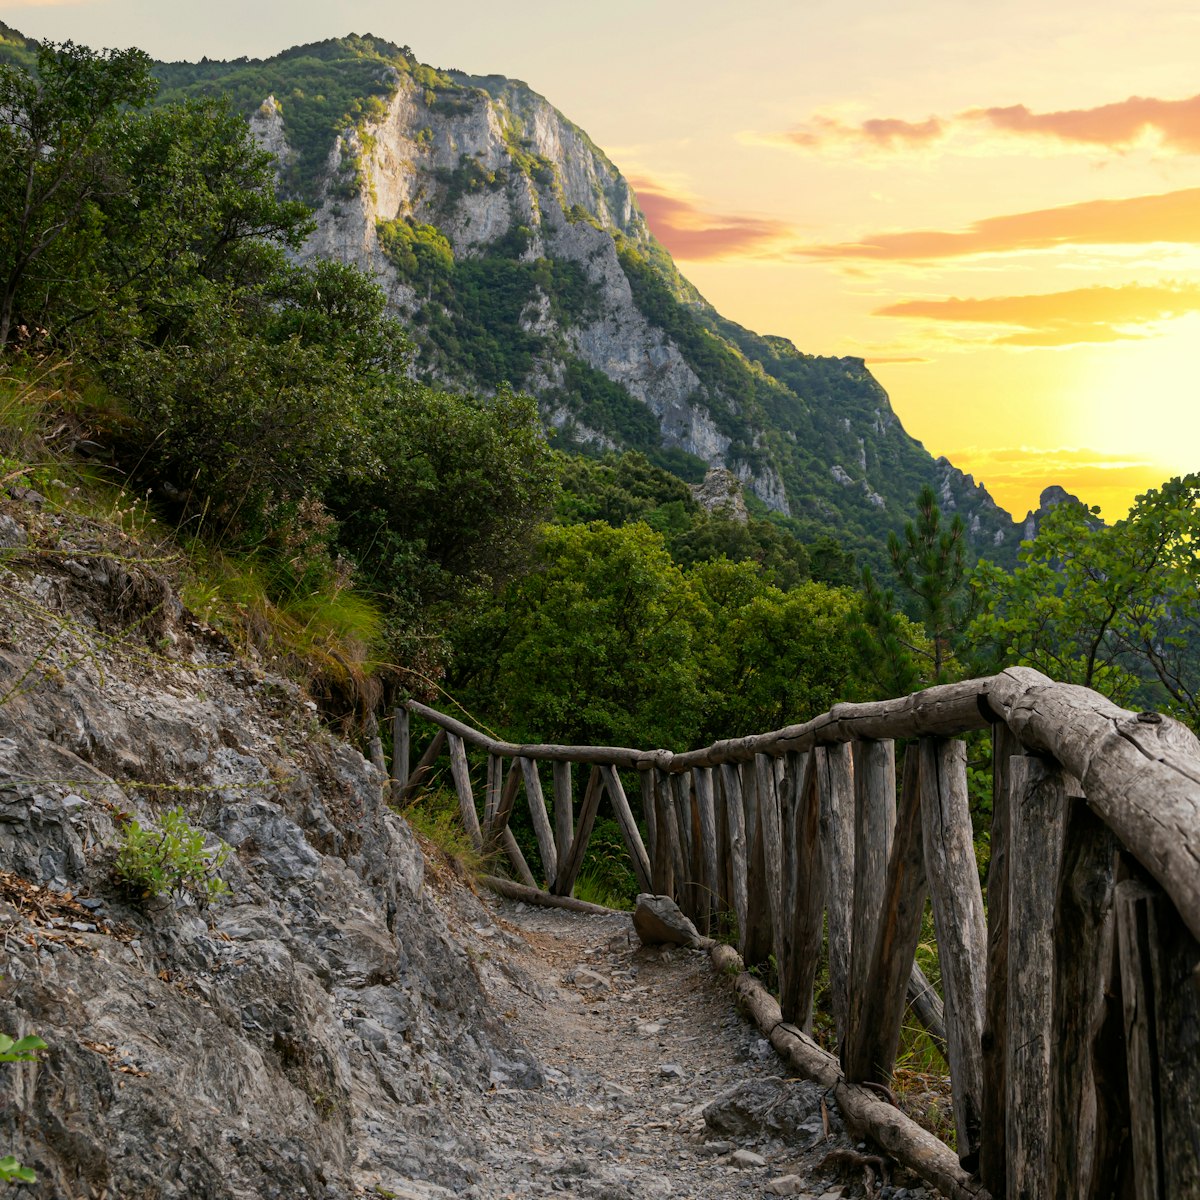 Beautiful sunset over Mount Olympus in Greece. This is the small road to Enipea source of the river Zeus Bath near the village of Litochoro; Shutterstock ID 1789244651; your: Erin Lenczycki; gl: 65050 ; netsuite: Digital; full: Digital
1789244651